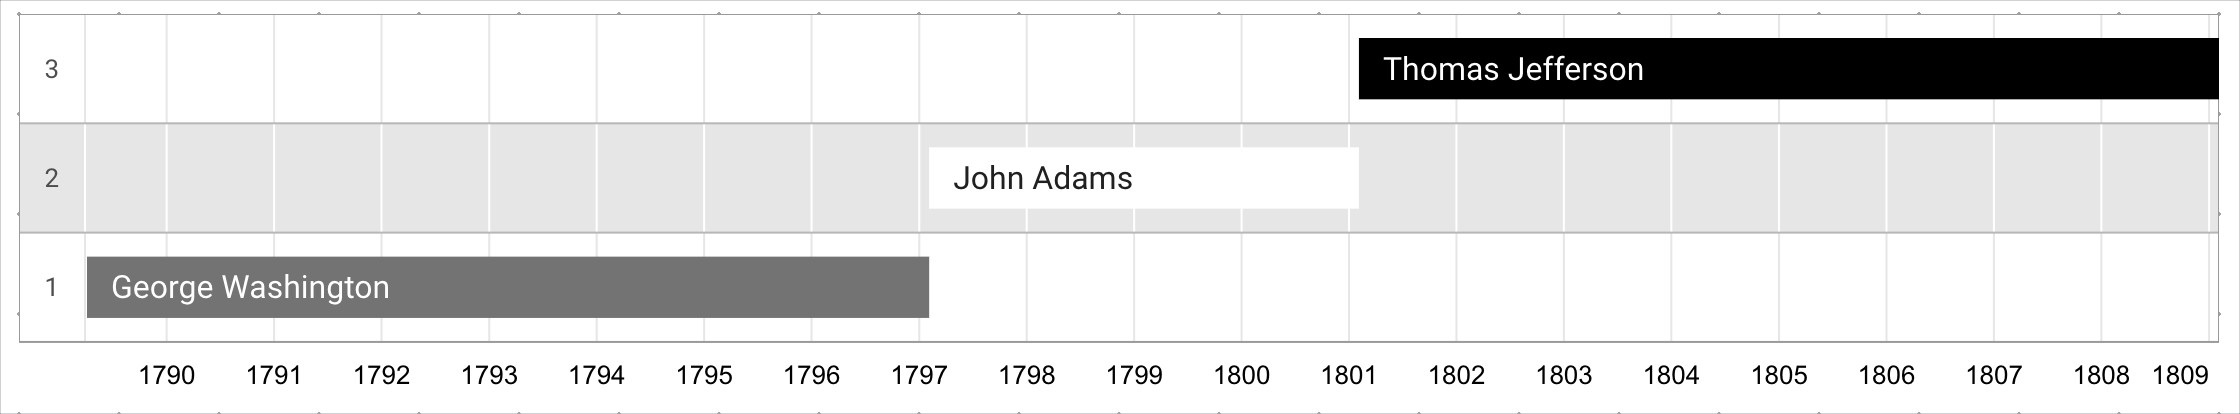 A timeline chart displays the length in years of US presidential terms for Thomas Jefferson, John Adams, and George Washington.